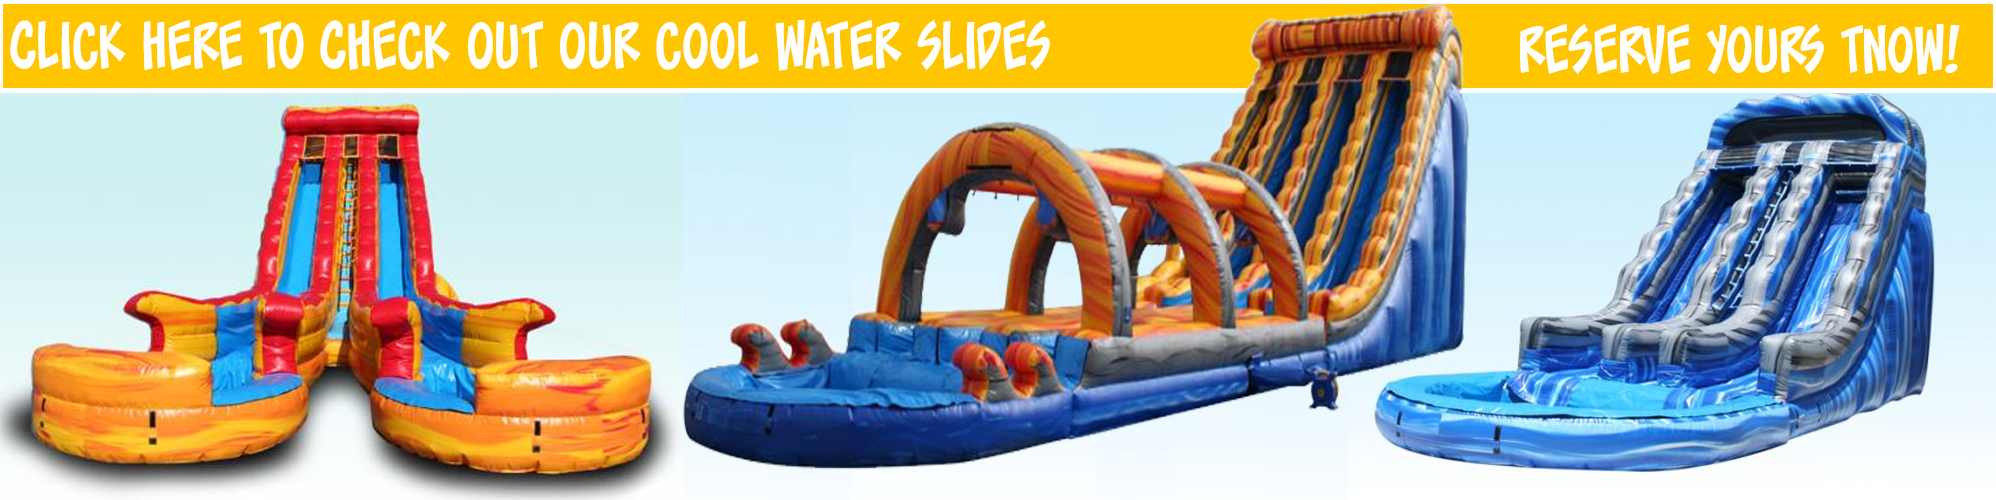 Beat the Heat with Water Slide Rentals from Fun Times Party